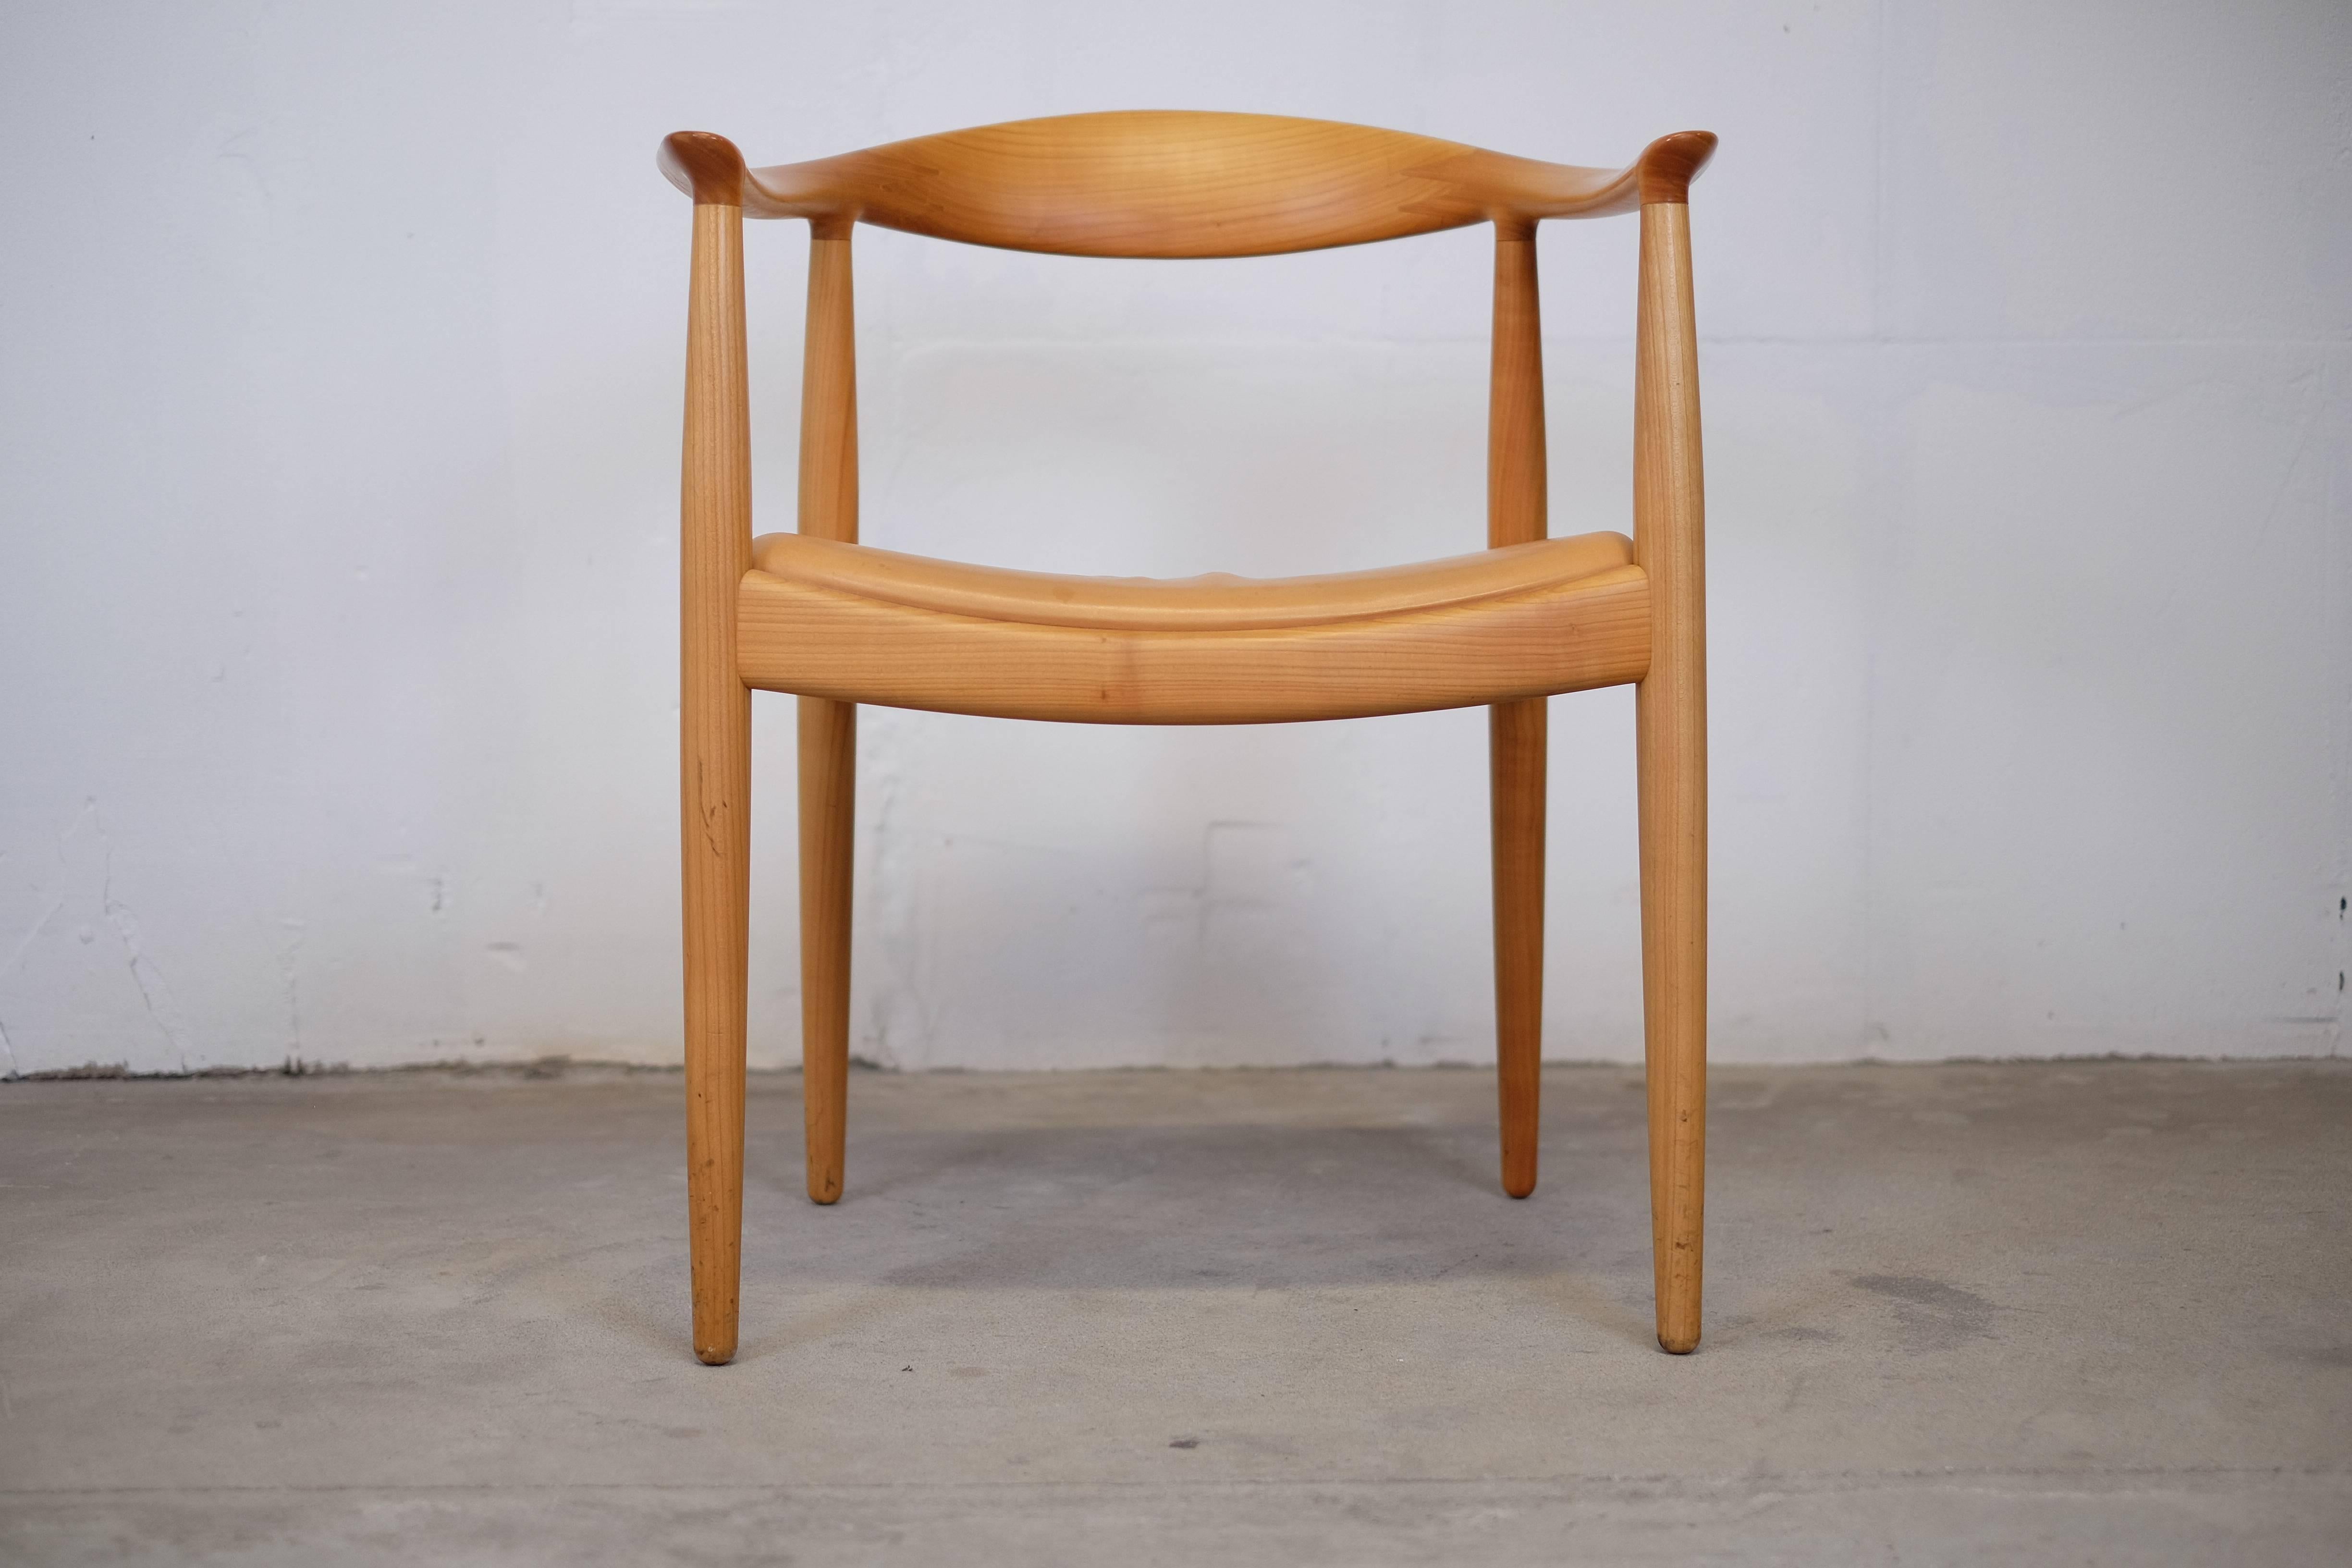 'The Round One' as Wegner referred to it with his usual Provincial modesty, is perhaps the most famous Danish piece of furniture of them all – which says a bit. 

Already a year after the production of this chair startet at Johannes Hansen